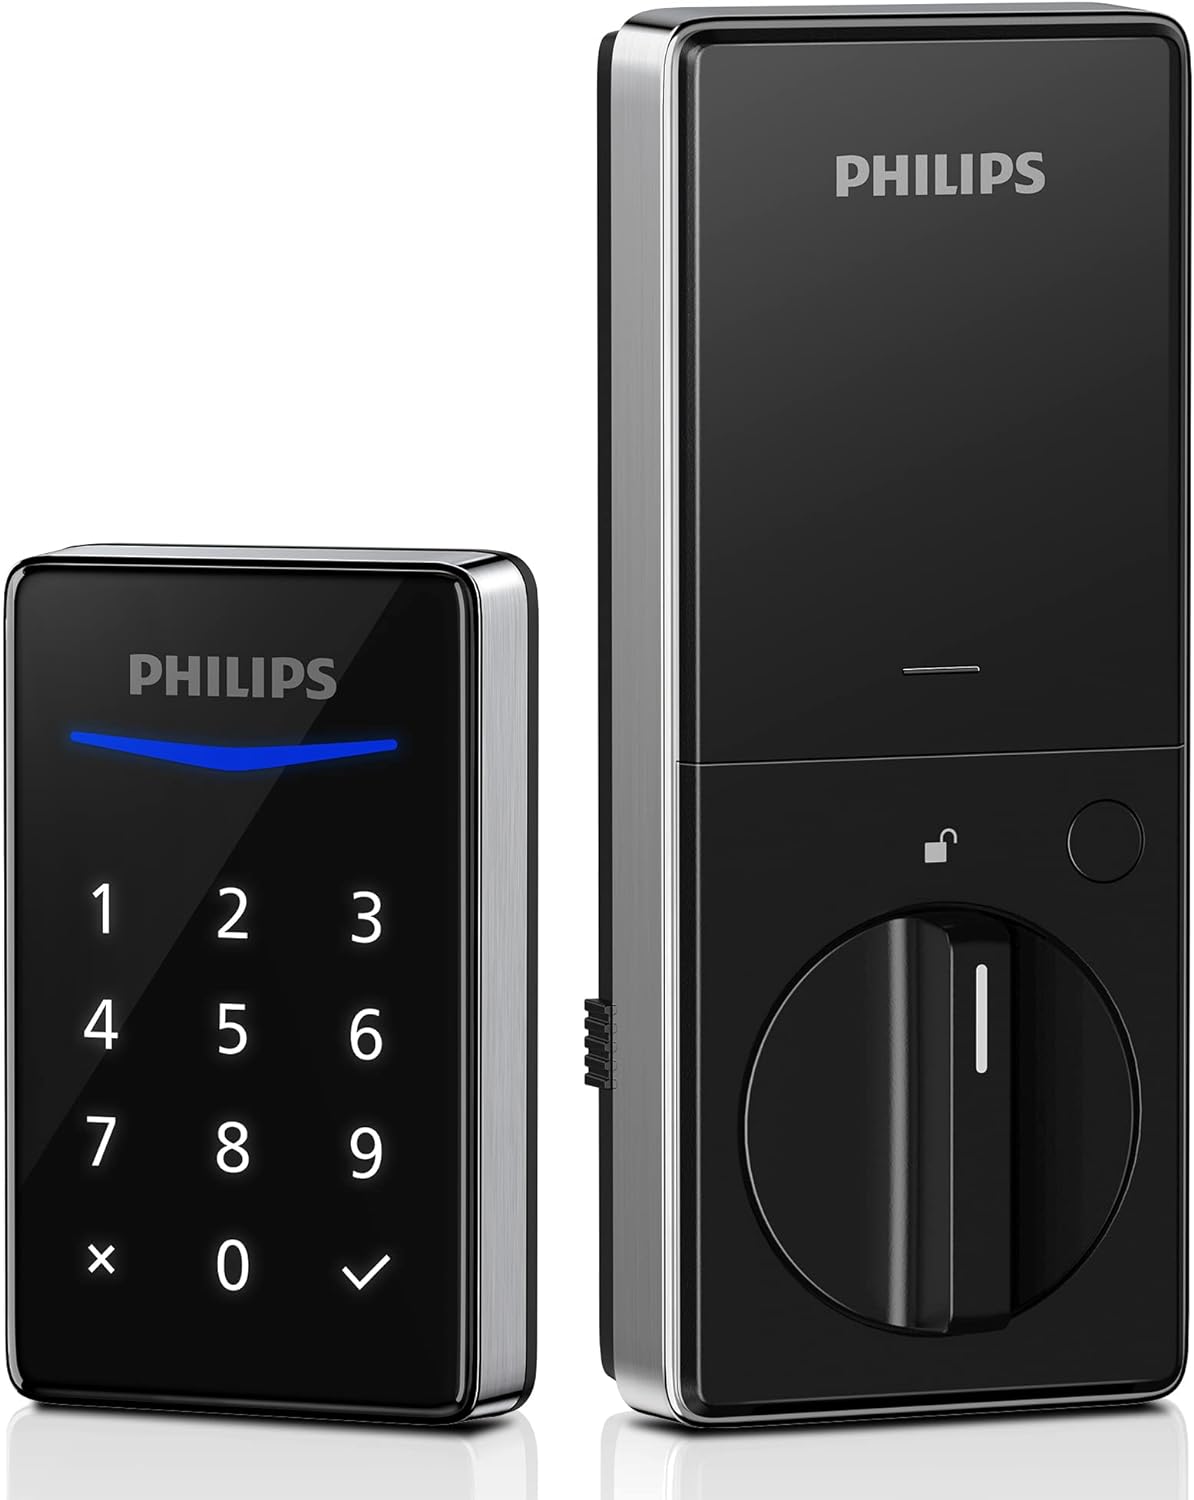 Philips Keyless Entry Door Lock - Generate One-time Code Remotely Nonconnected- Touchscreen Keypad Standalone Deadbolt Lock - Satin Nickel